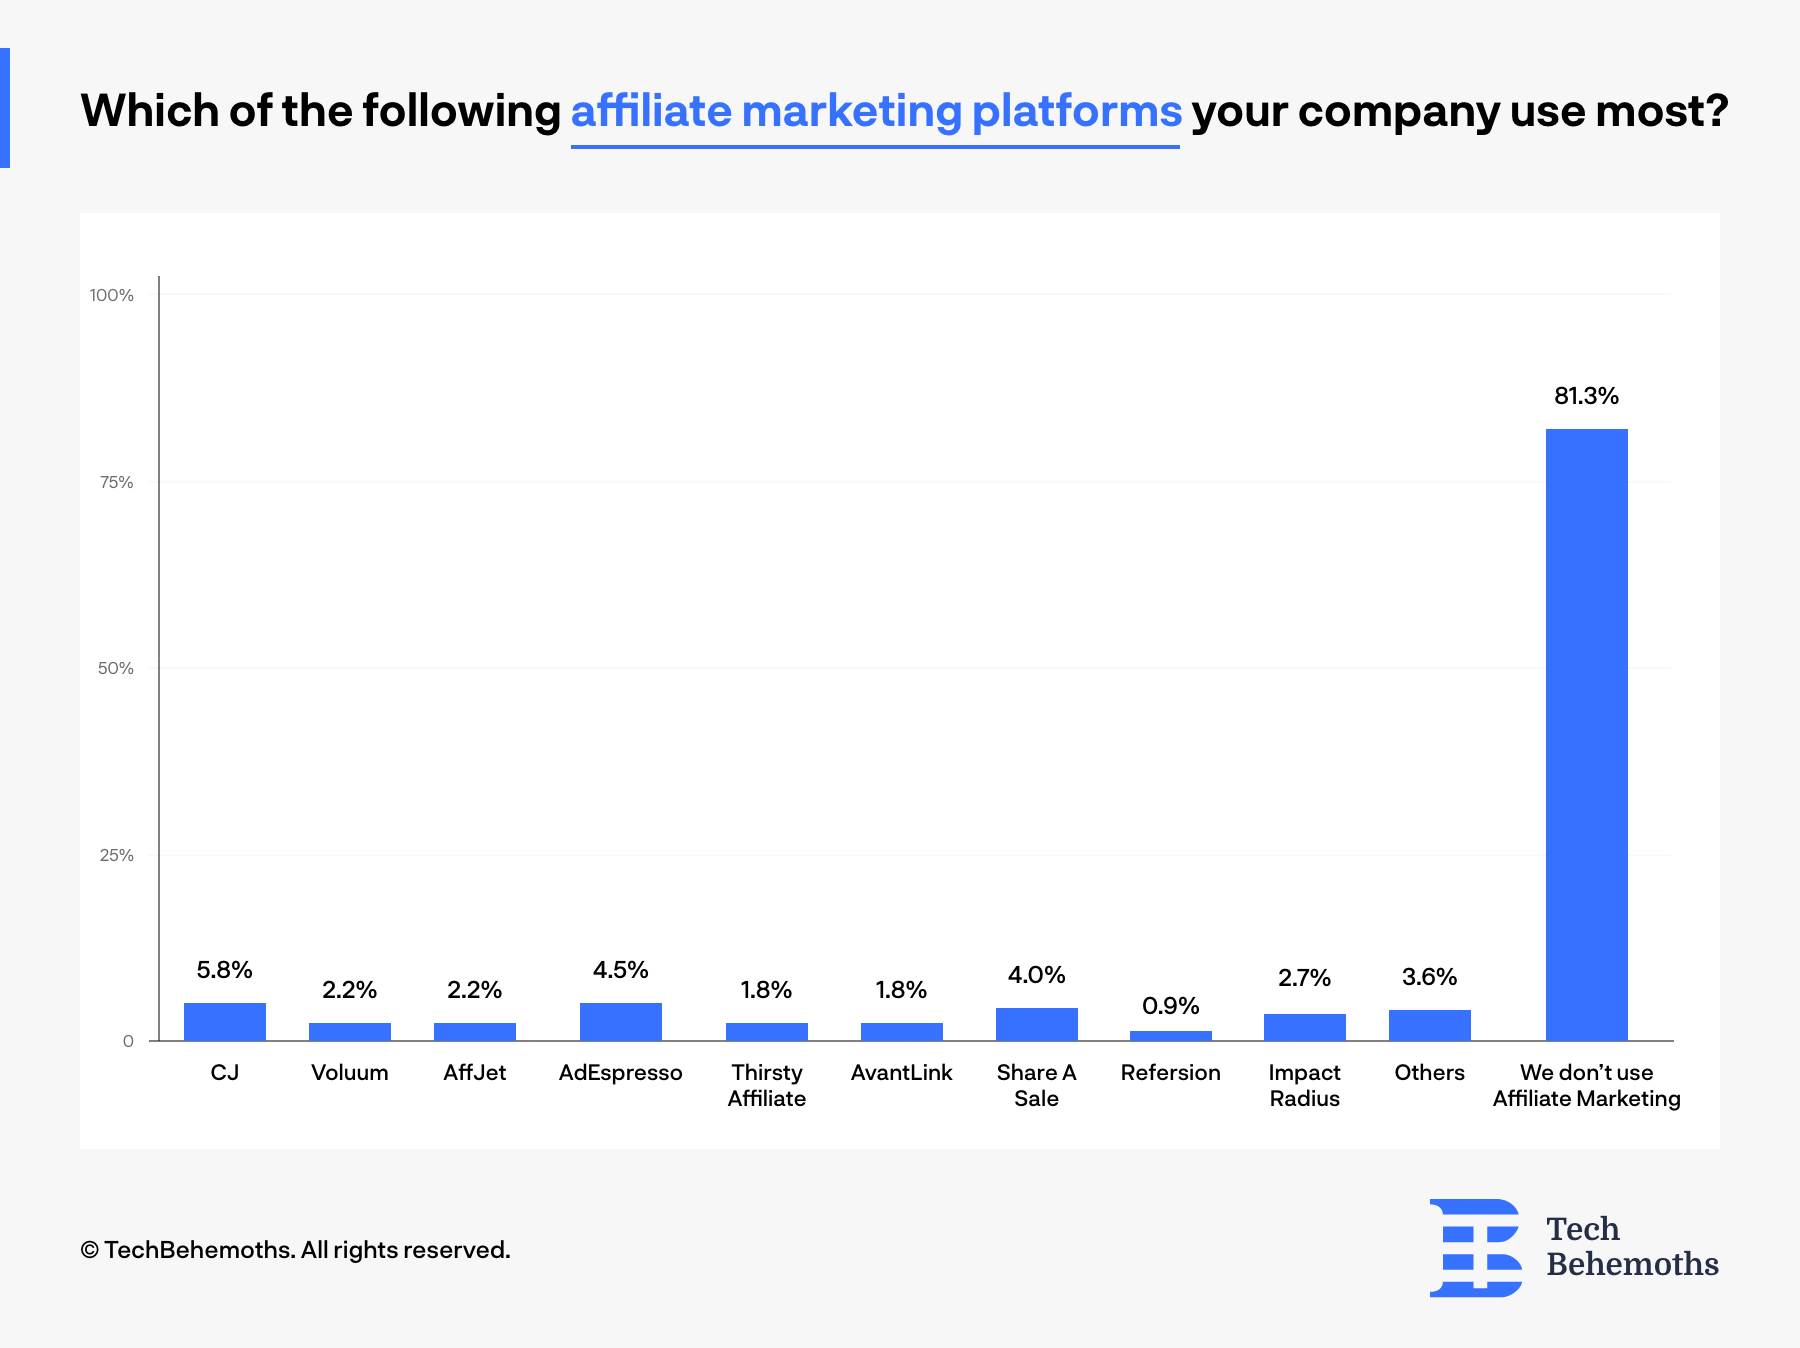 top affiliate marketing platforms IT companies and digital agencies use - survey results